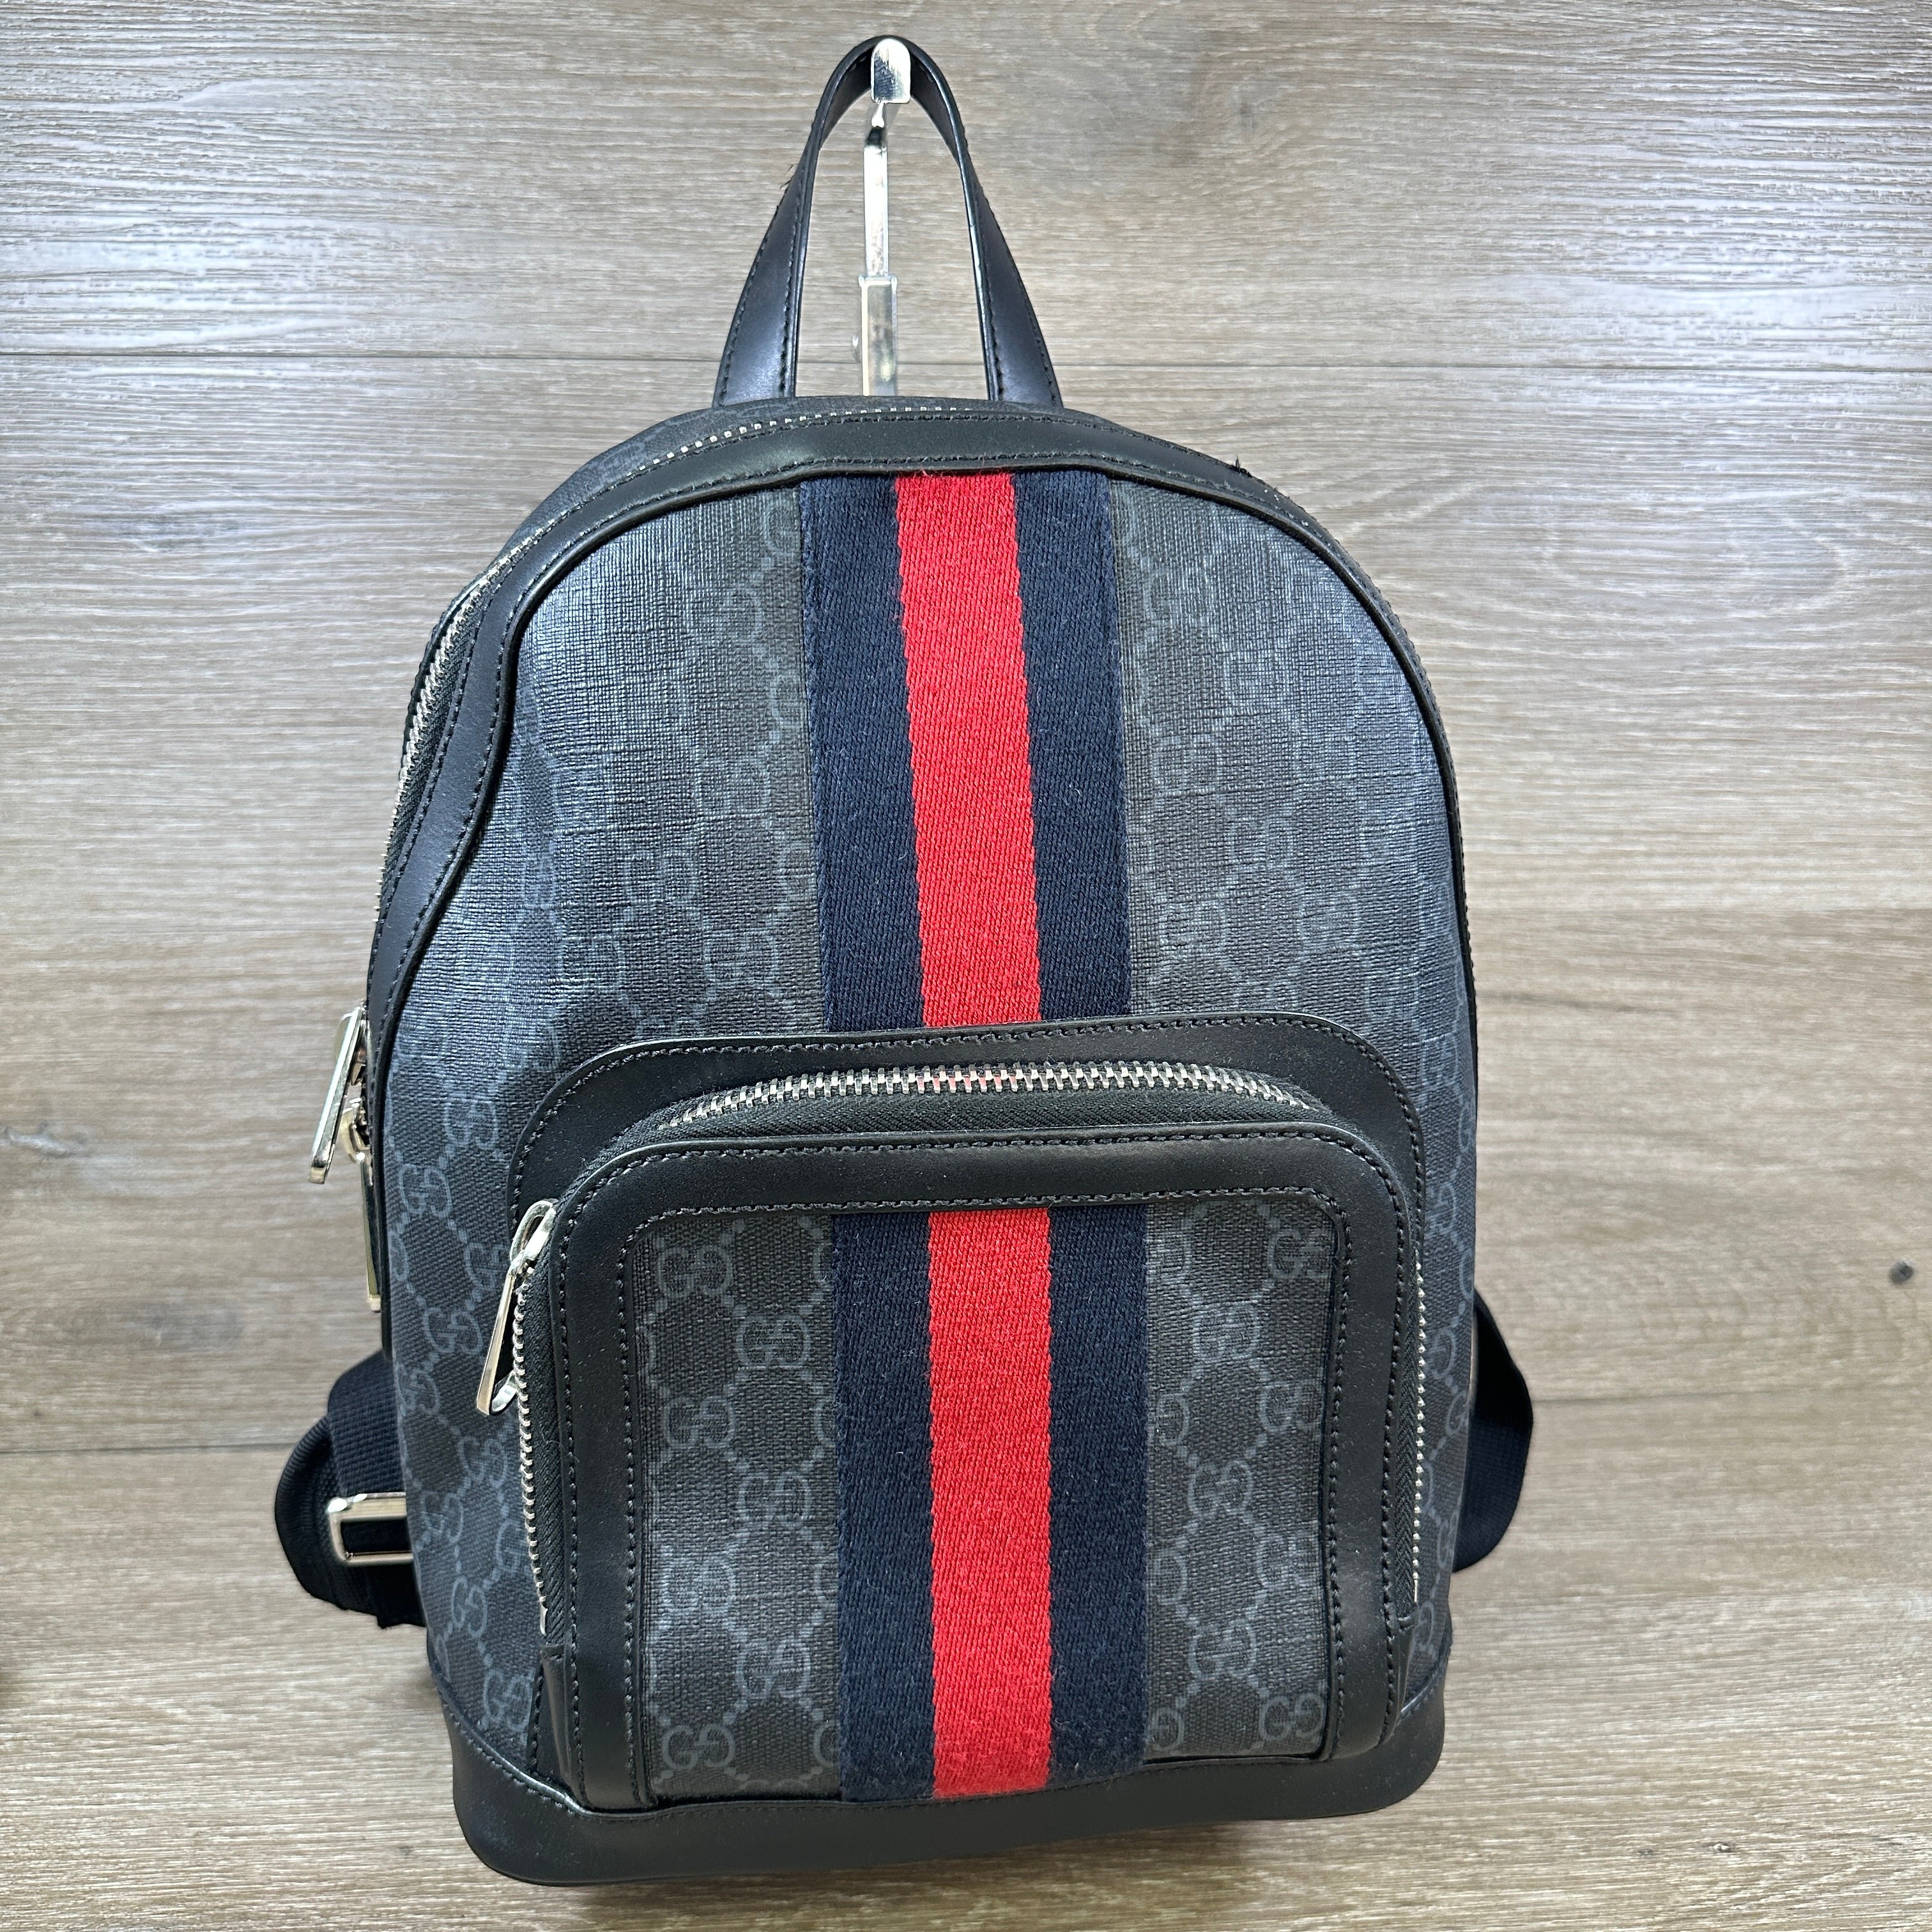 Gucci Pre-Owned Navy GG Supreme Canvas Laptop Case, Best Price and Reviews